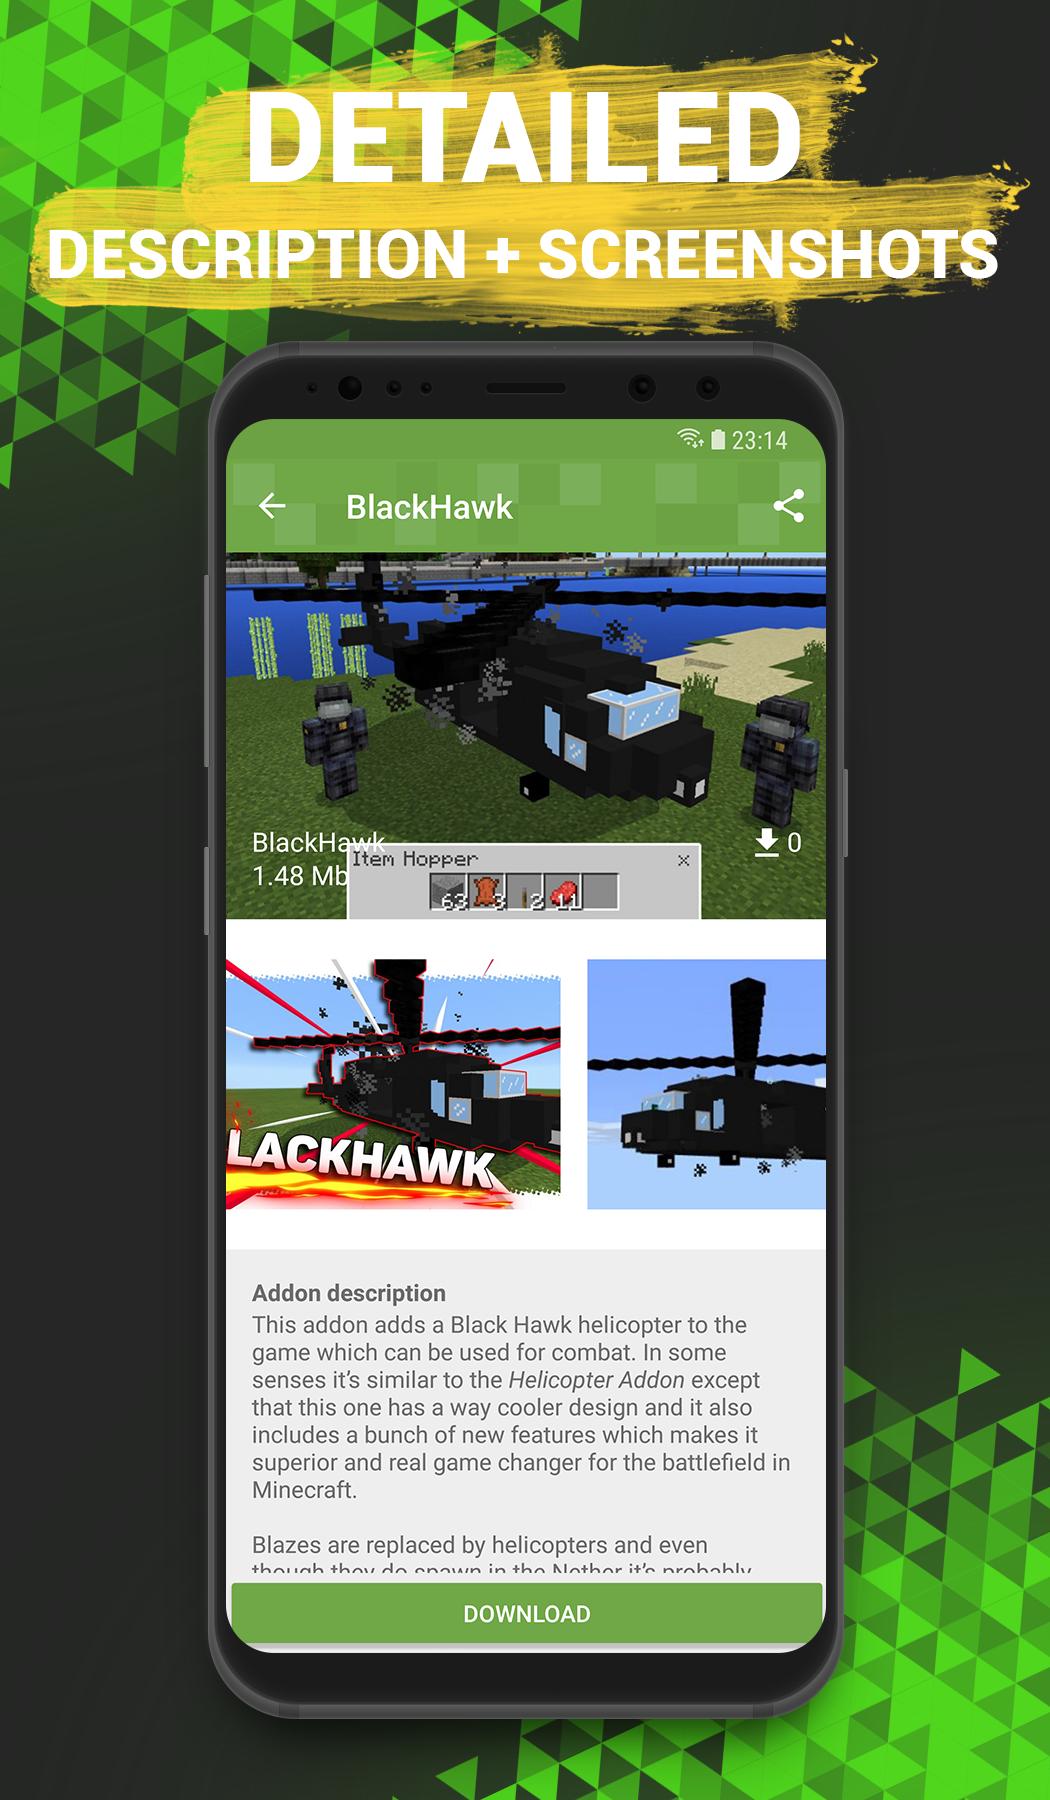 TLauncher PE (1.20, 1.19) - Fastest Way to Get Resources for Minecraft PE 3